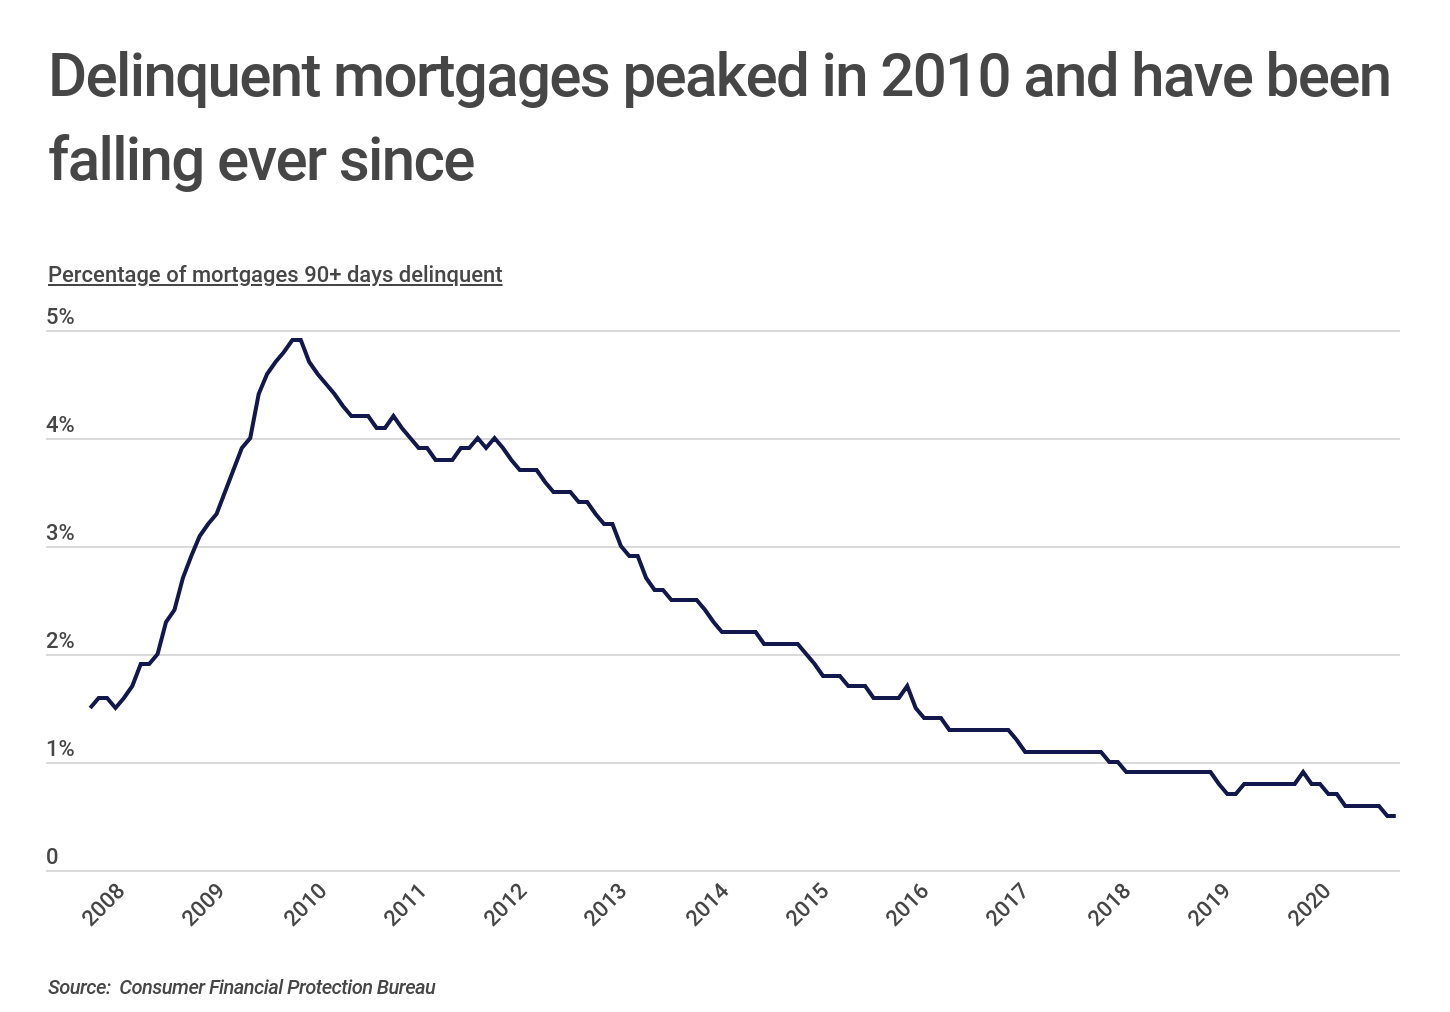 Chart1_Delinquent mortgages peaked in 2010 and have been falling ever since